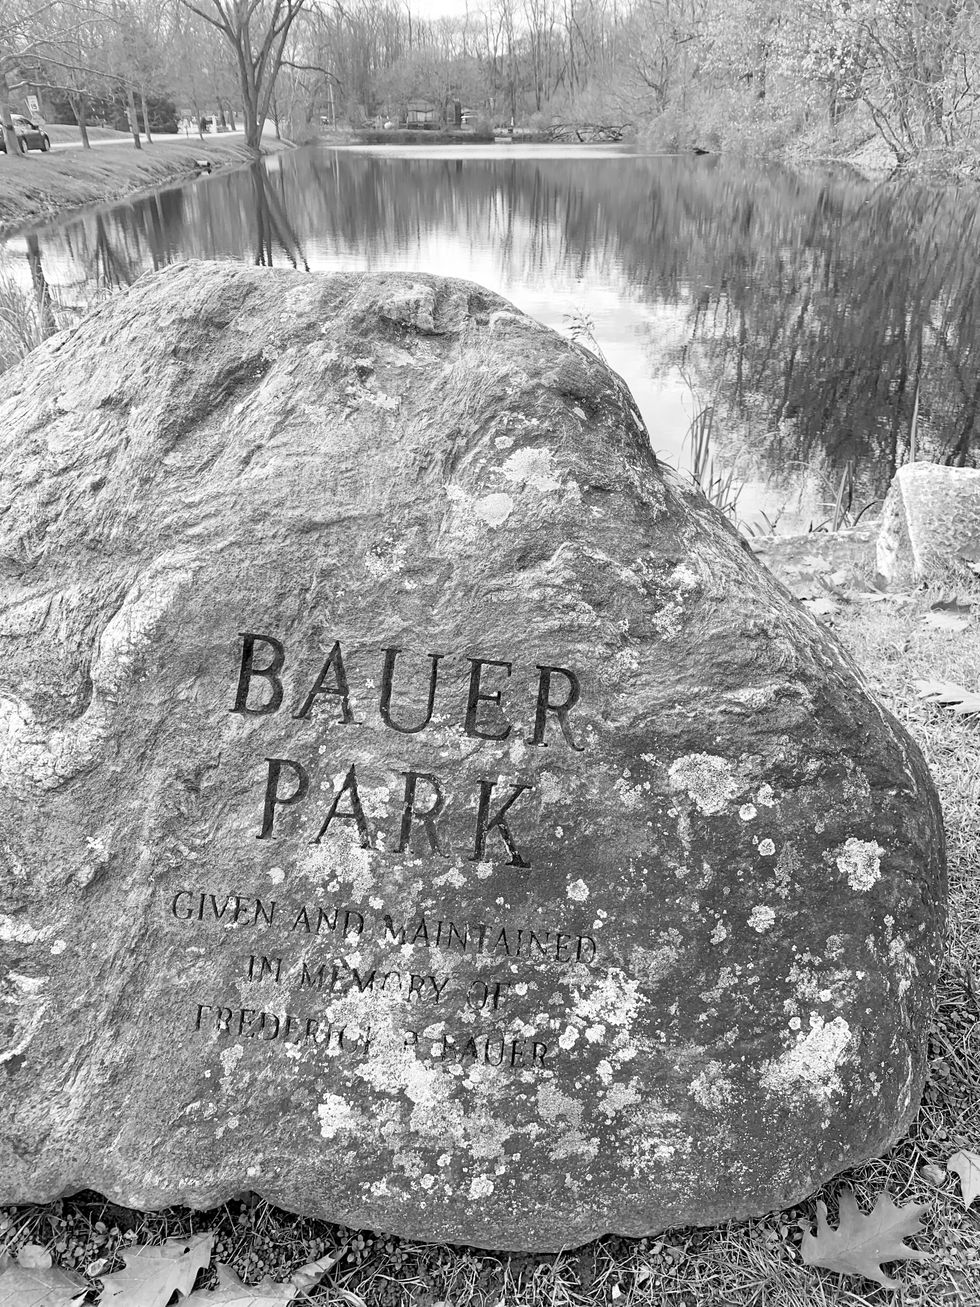 The true story behind Bauer Park, the fishing pond at the town Grove in Lakeville/Salisbury